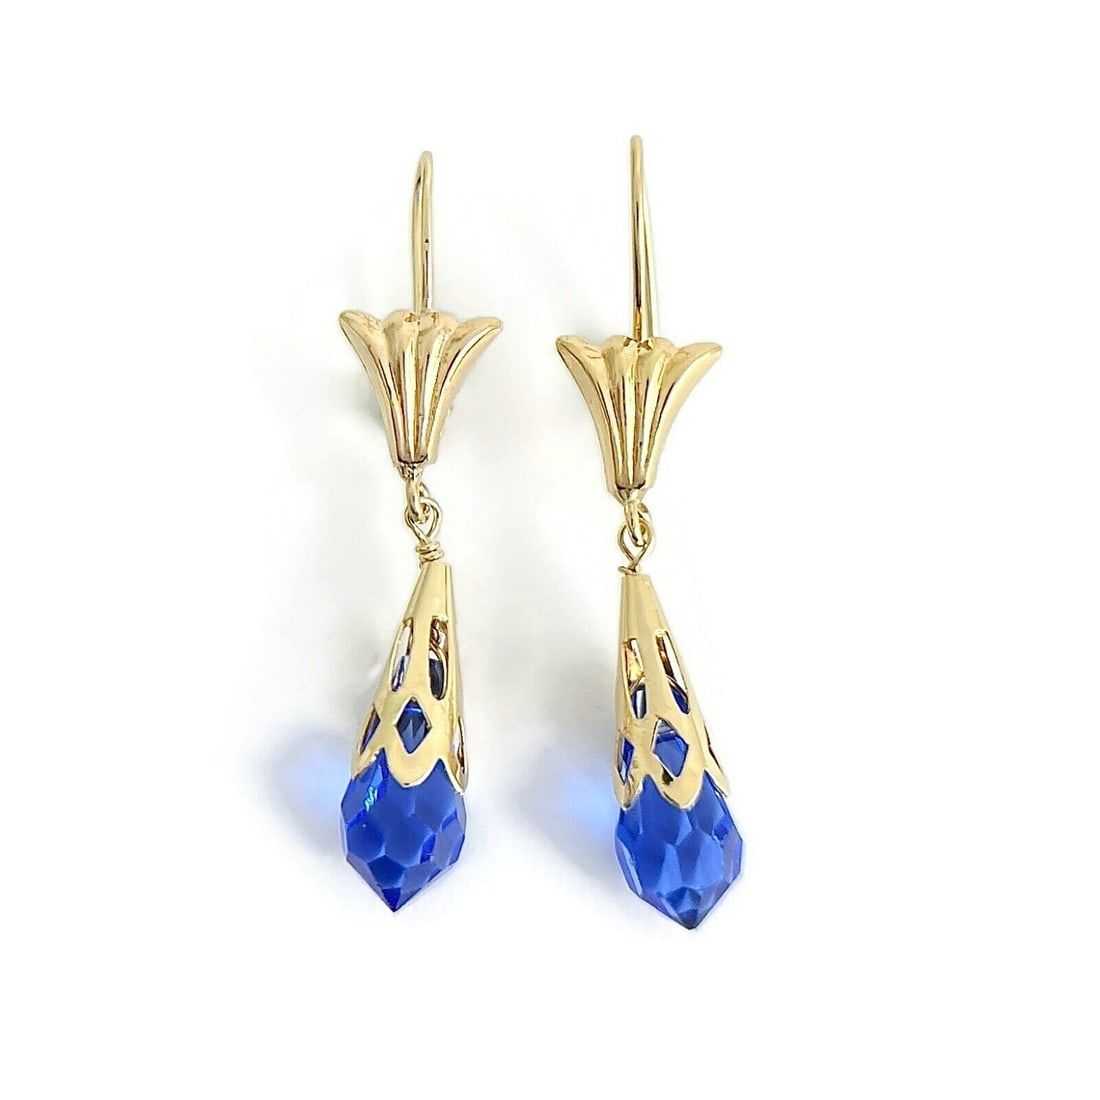 
14K gold and briolette simulated sapphire dangle drop earrings, estimated at $500-$600 at Jasper52.
